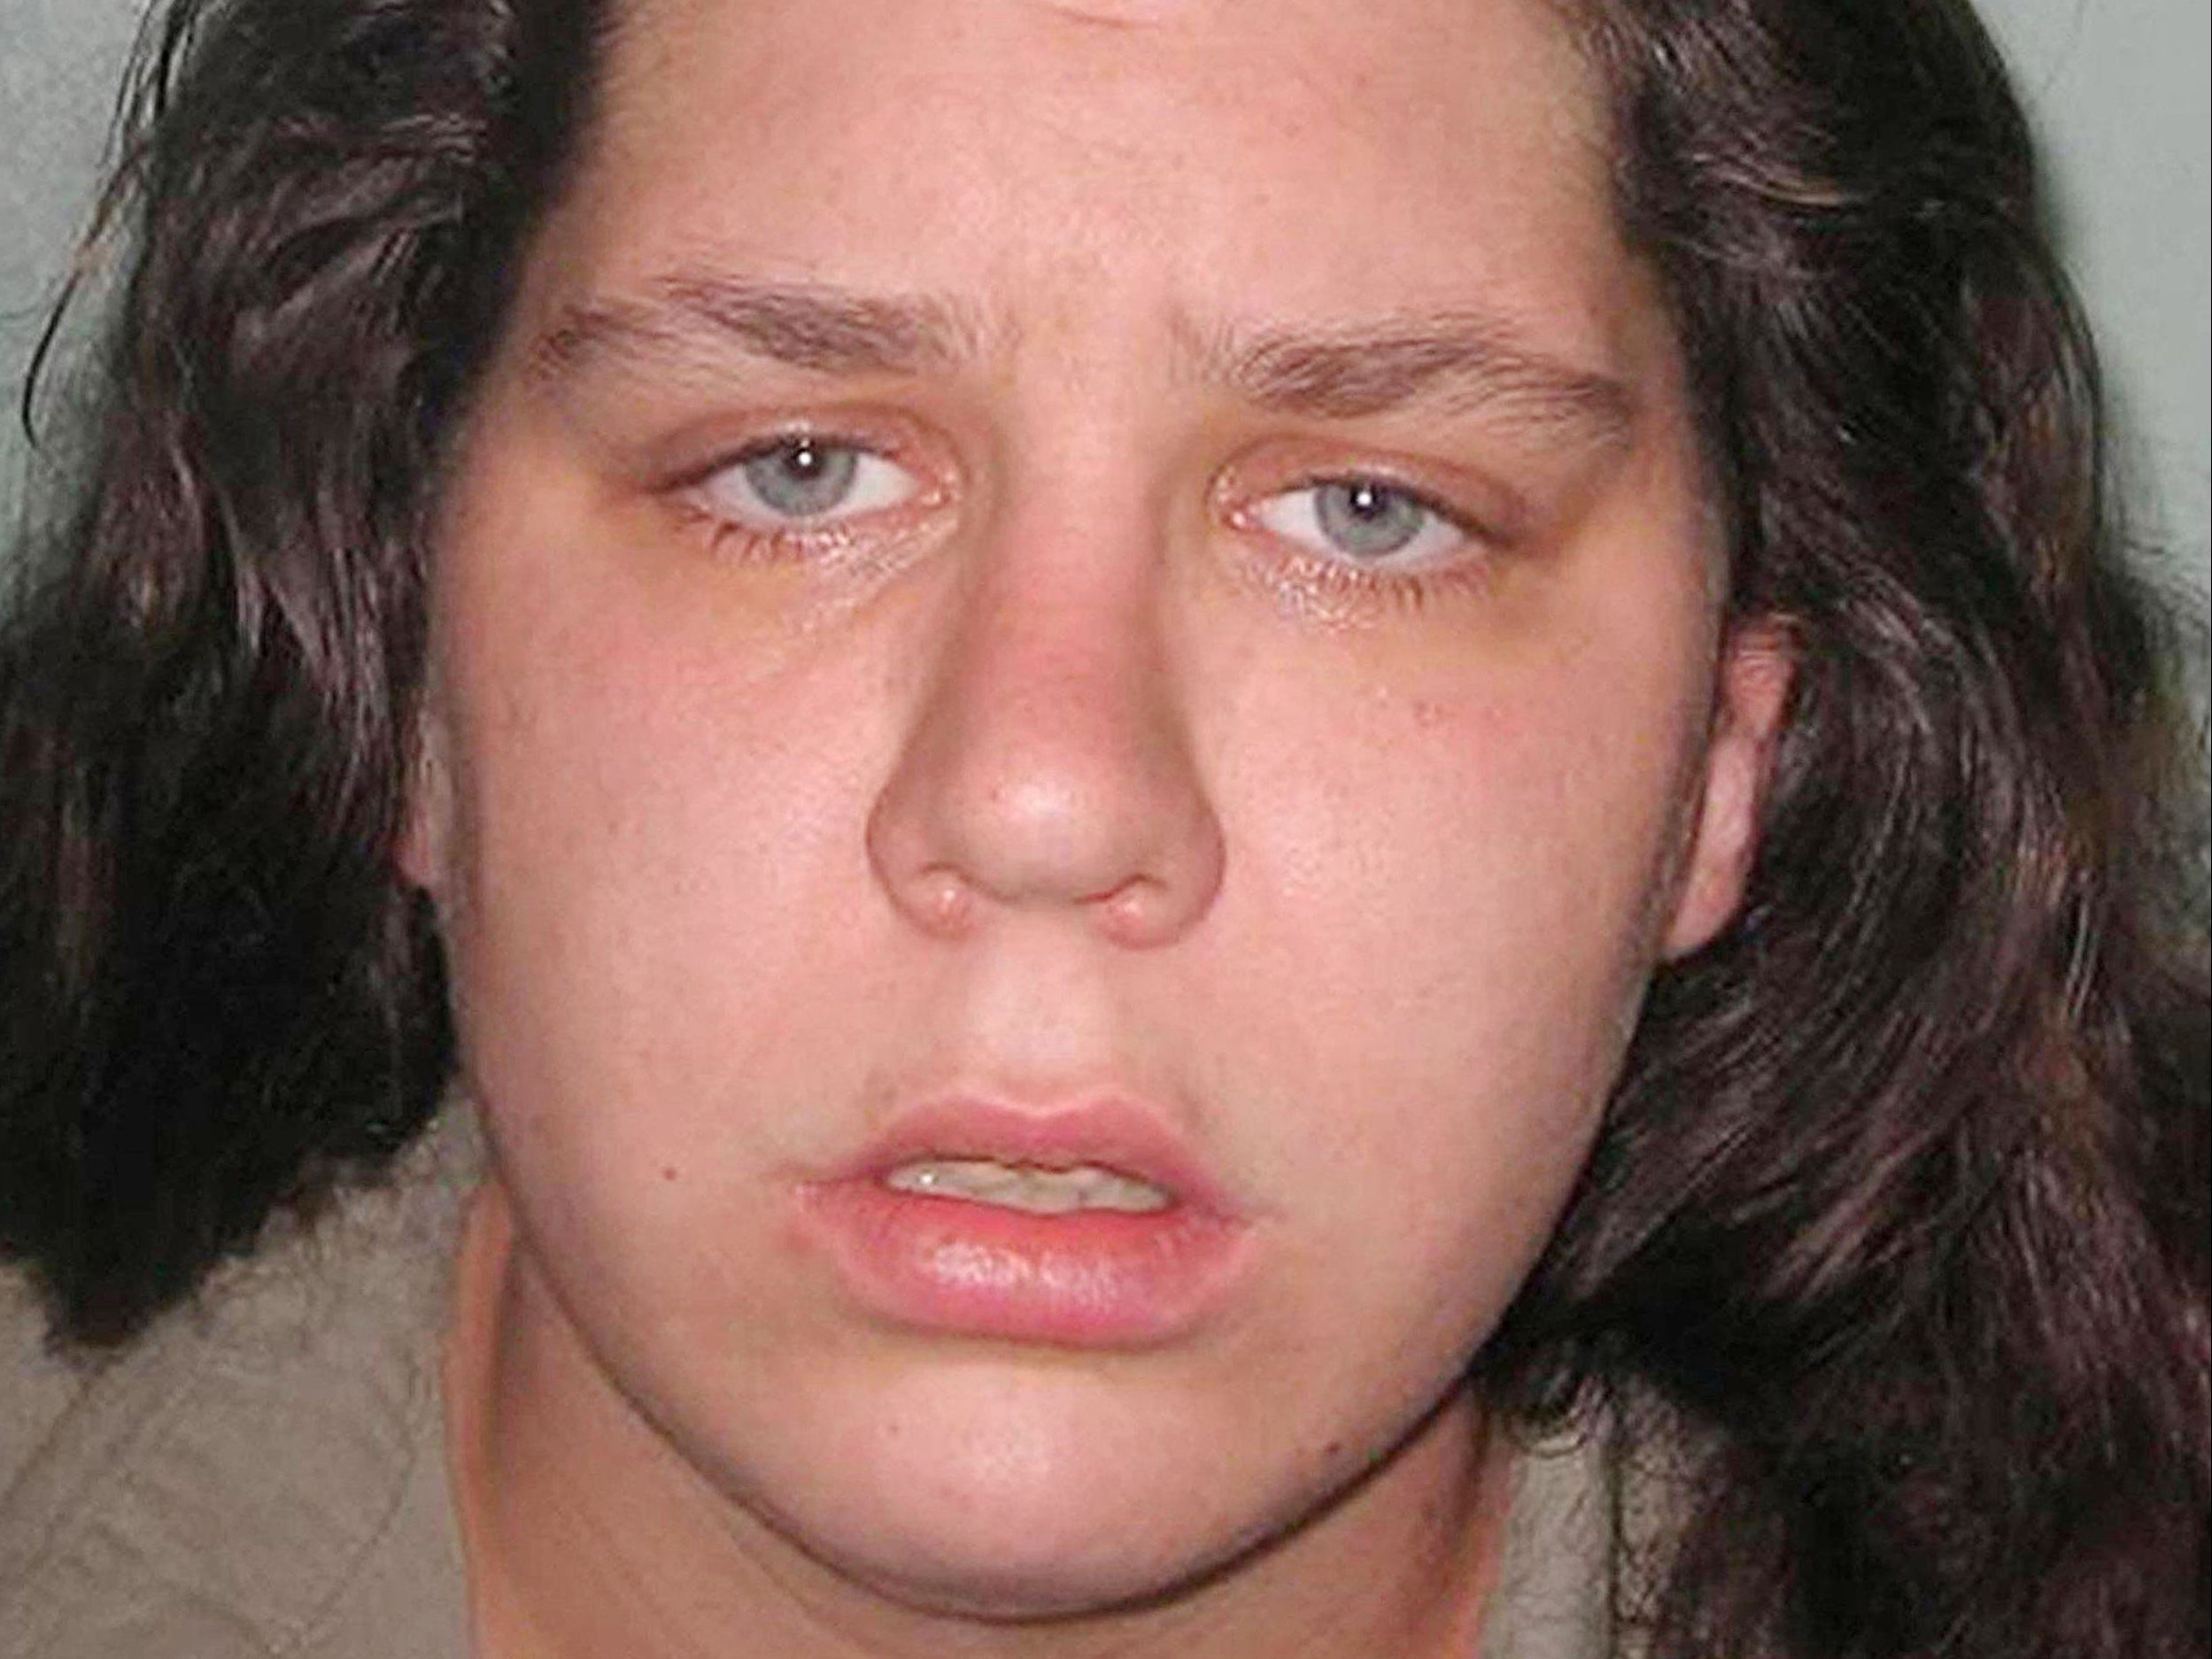 Tracey Connelly was jailed at the Old Bailey in 2009 for causing or allowing the death of her 17-month-old son Peter at their home in Tottenham